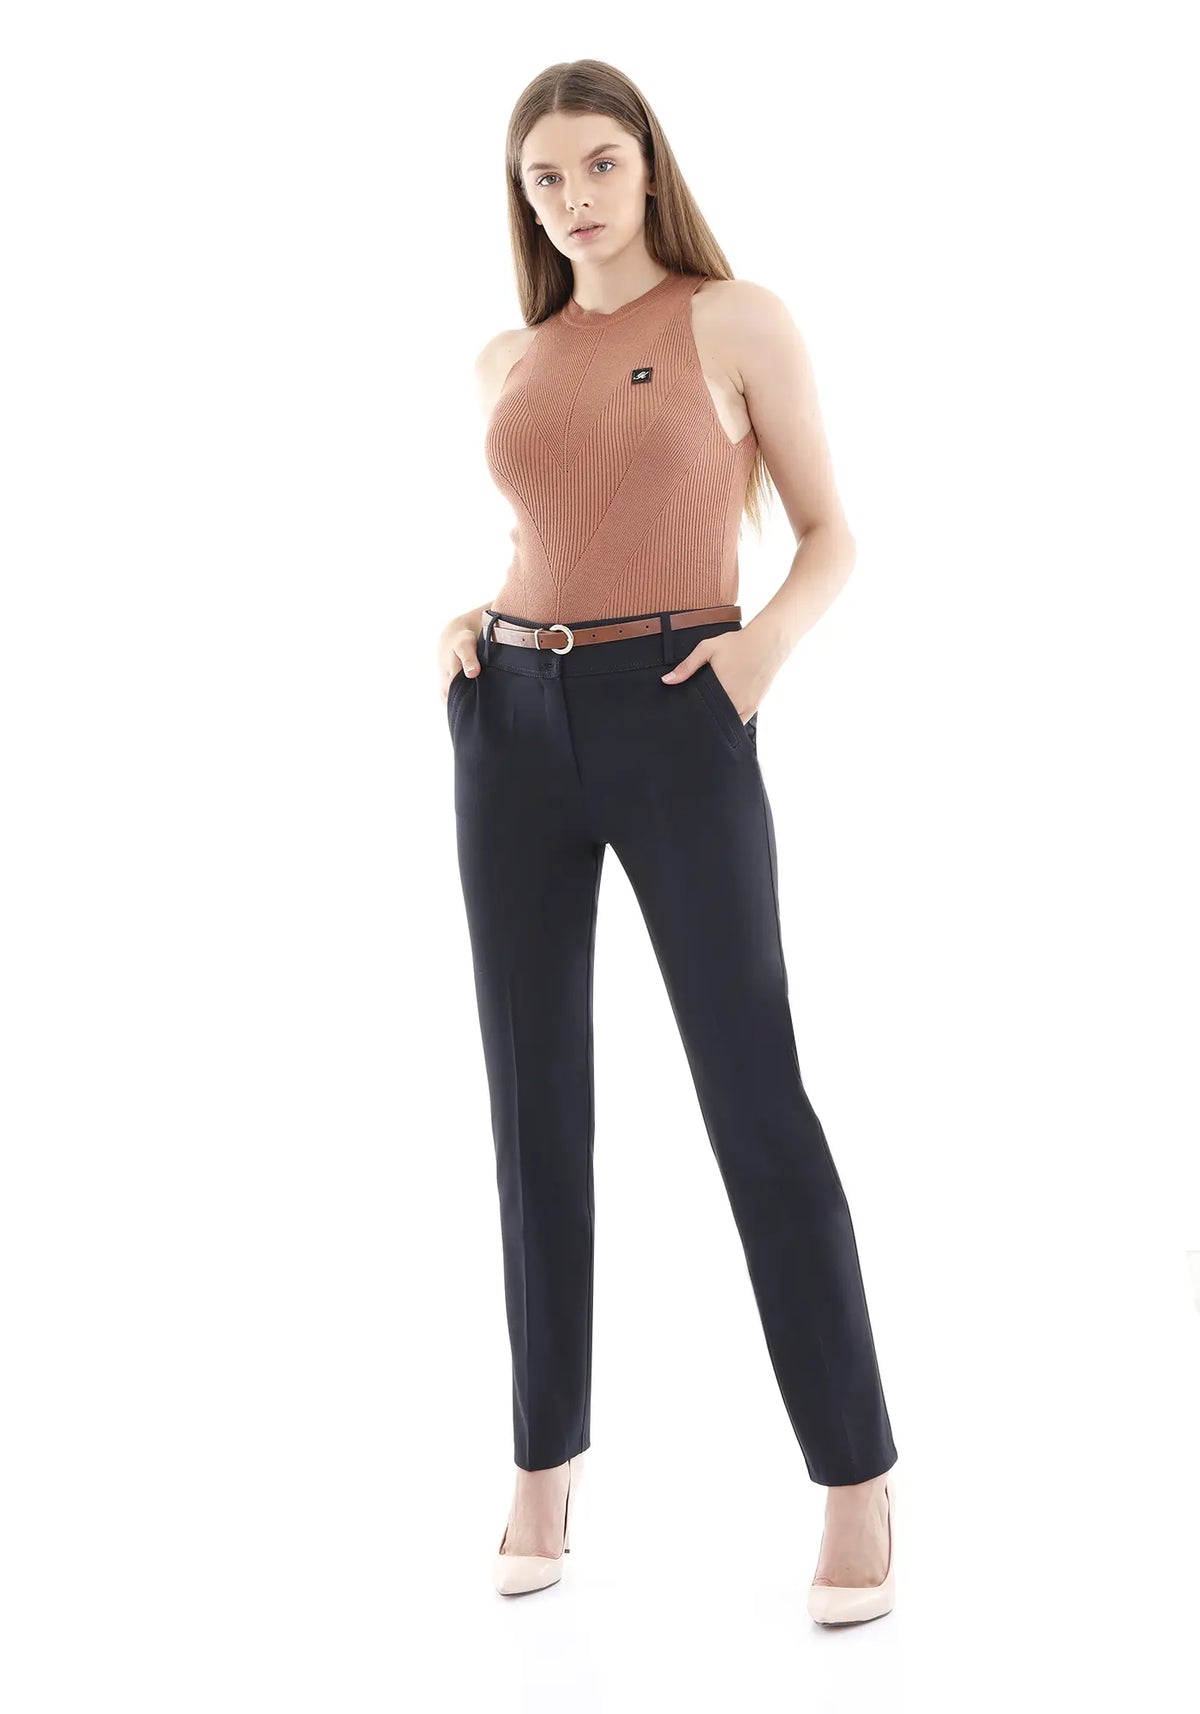 Navy Straight Leg Pants with Pockets and Belt